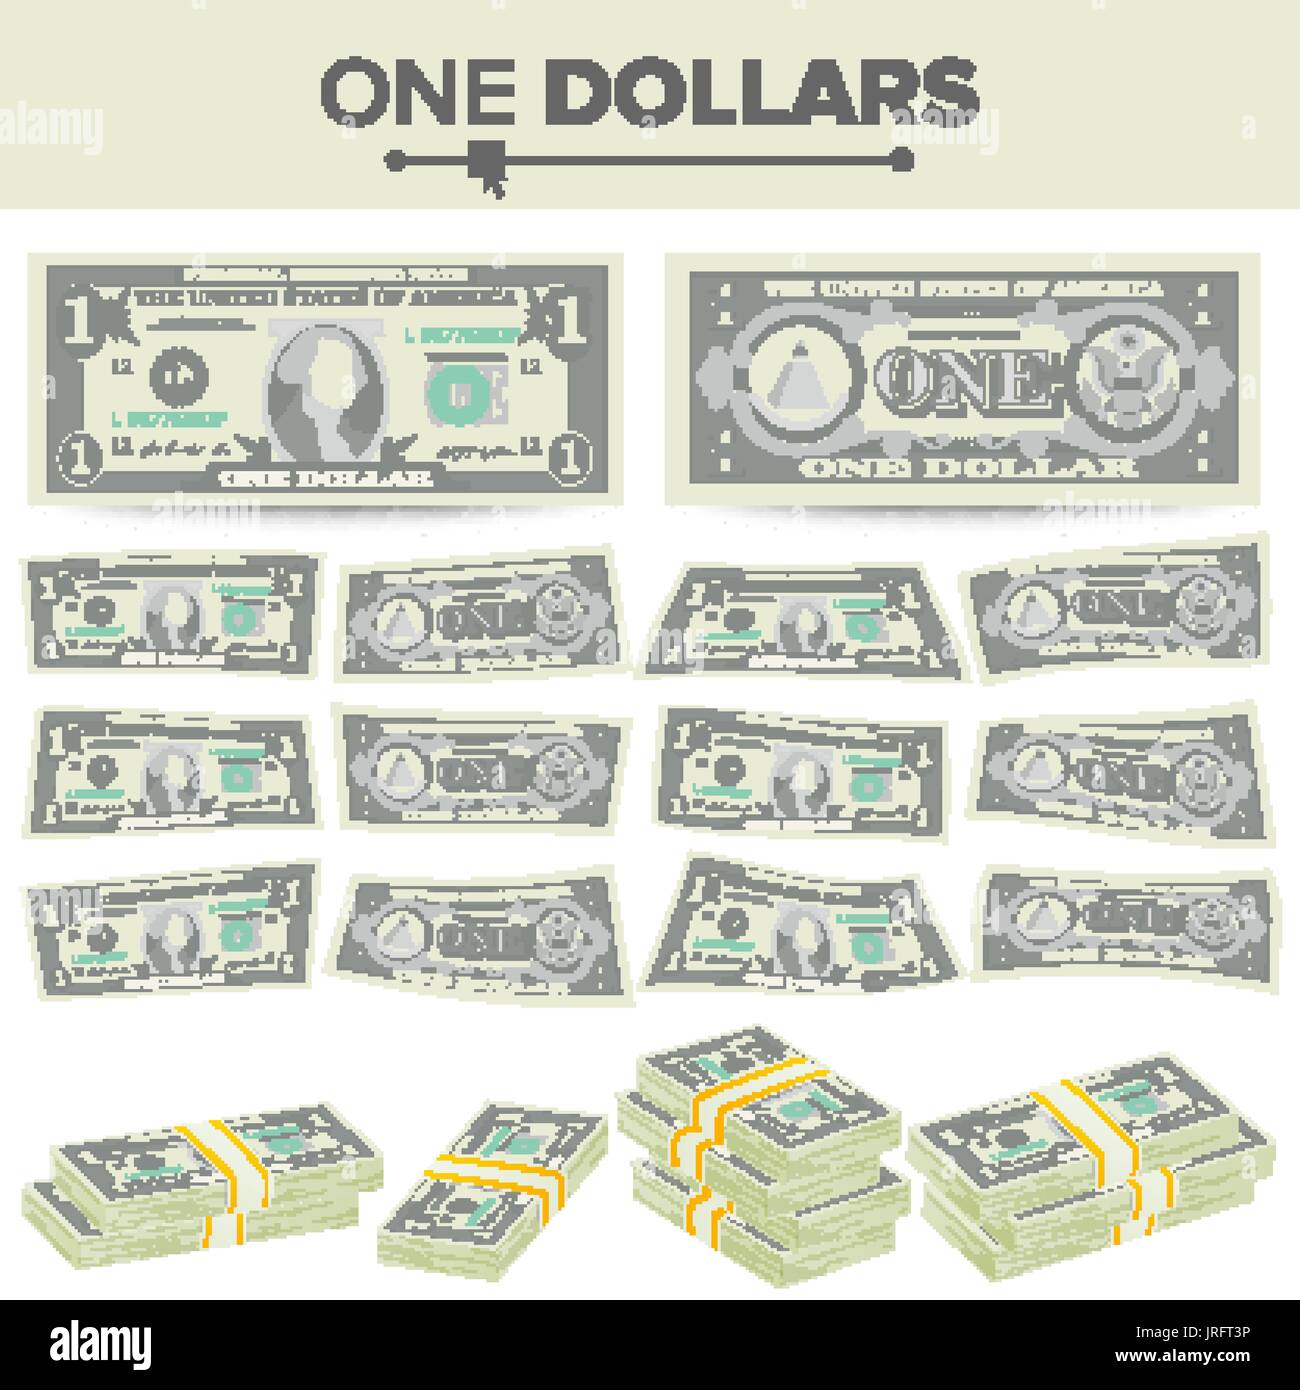 1 Dollar Banknote Vector. Cartoon US Currency. Two Sides Of One American Money Bill Isolated Illustration. Cash Symbol 1 Dollar Stacks Stock Vector